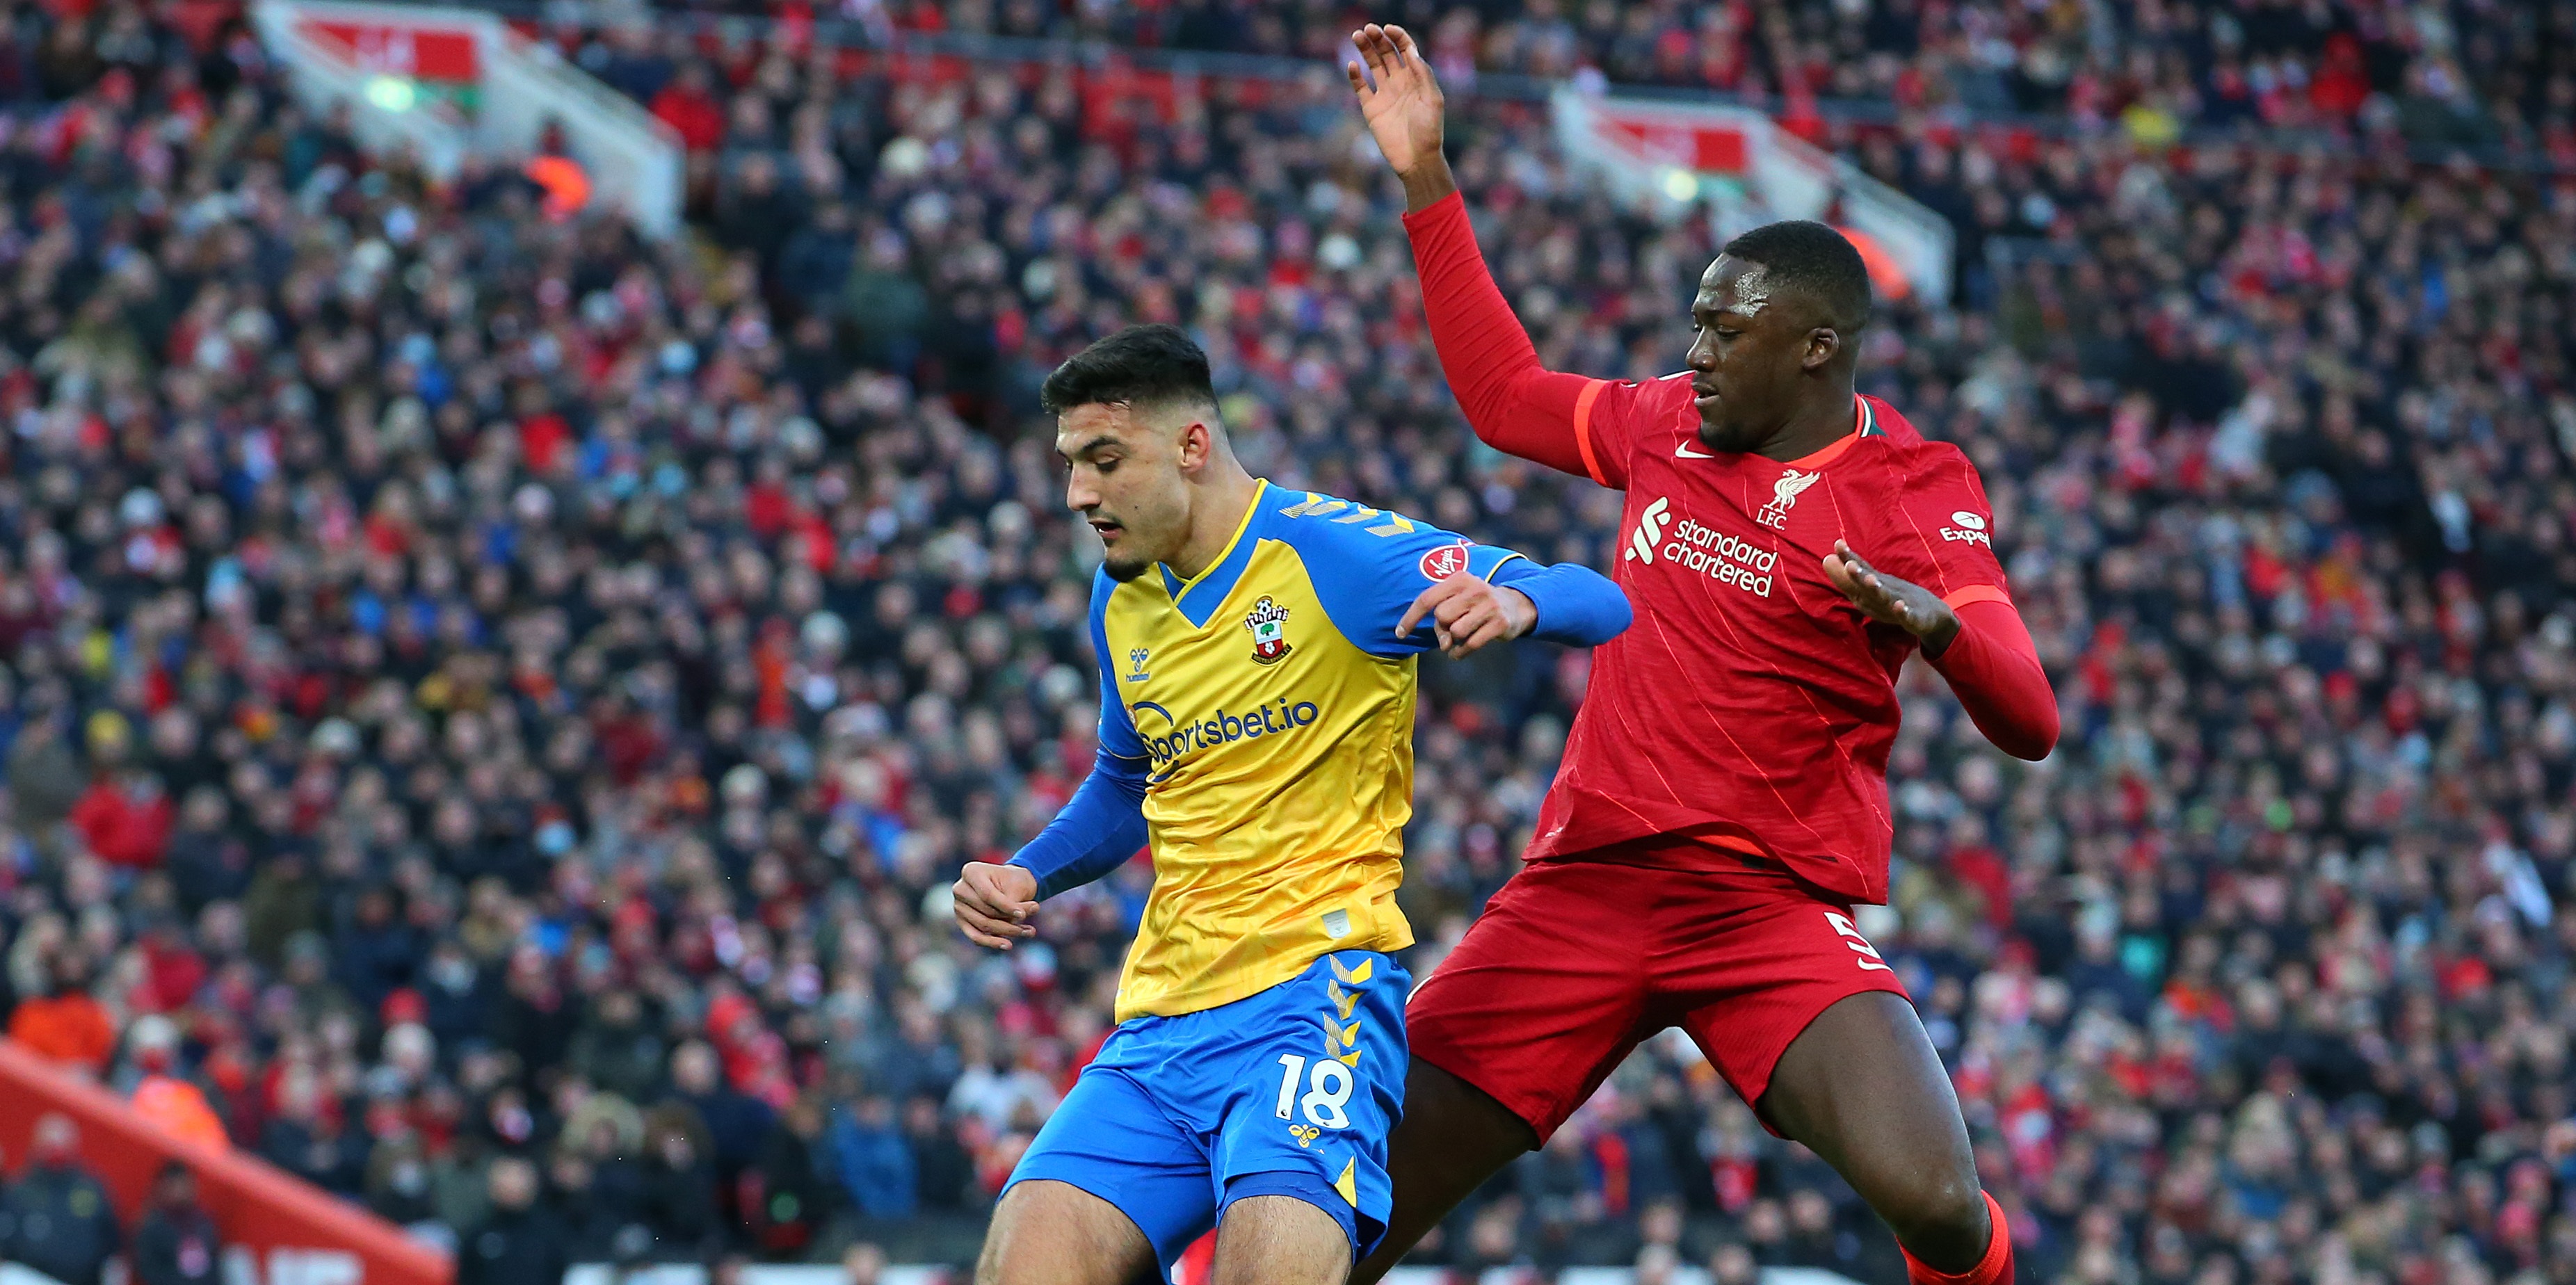 (Video) ‘My brother’ – Konate shares details of friendship he’s built with 24-year-old Liverpool star